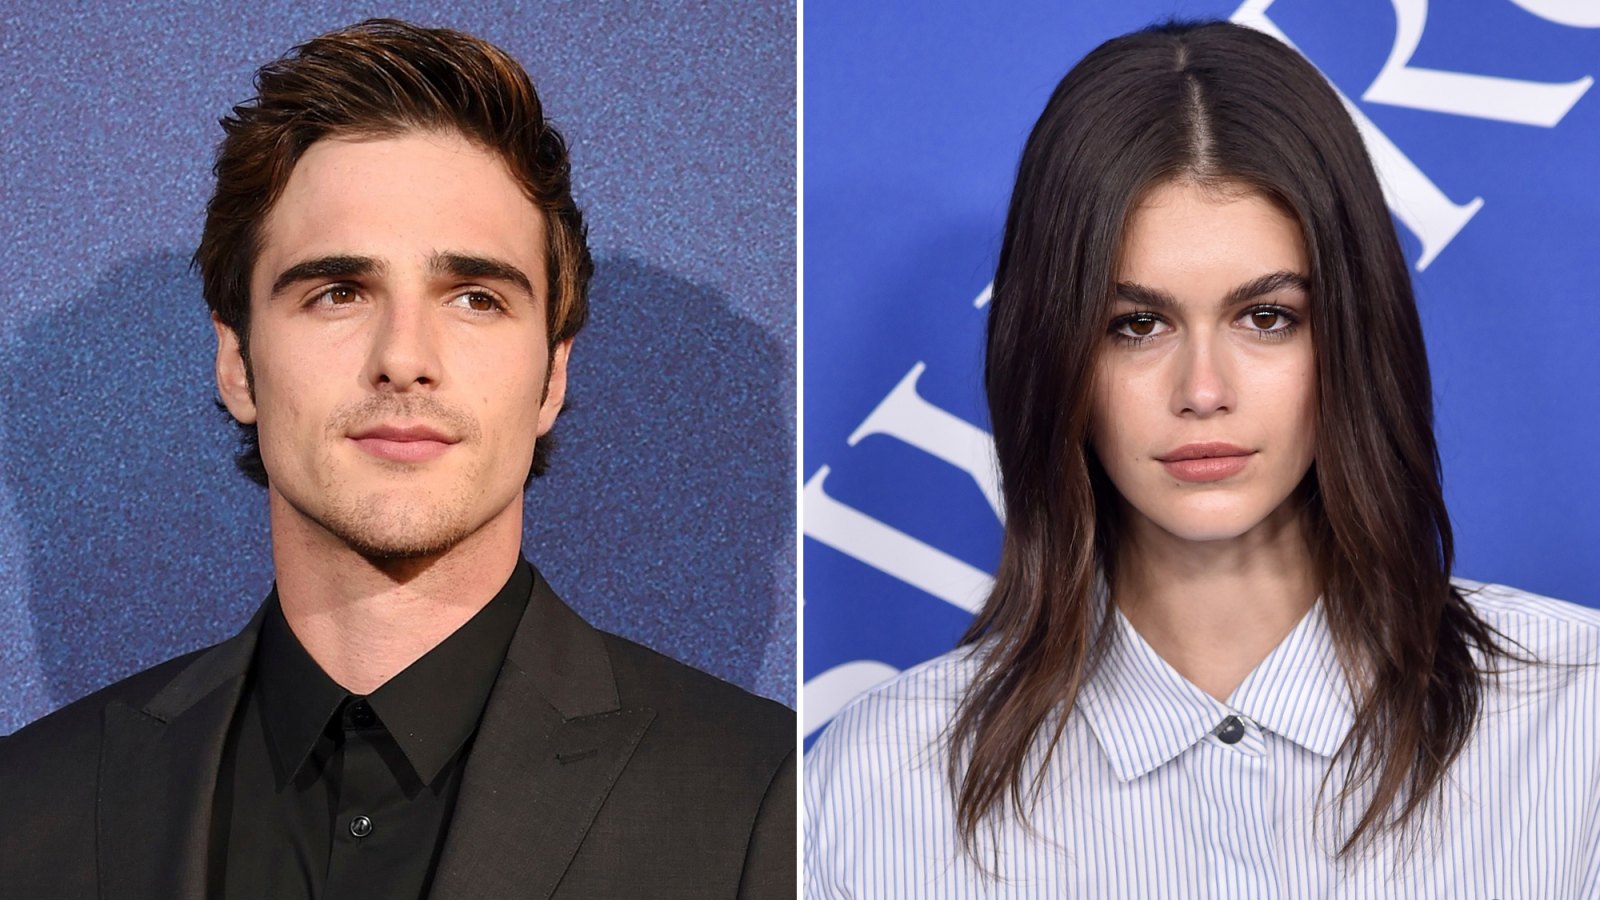 Jacob Elordi Says Kaia Gerber Gave Him a Haircut In Their First Week Together